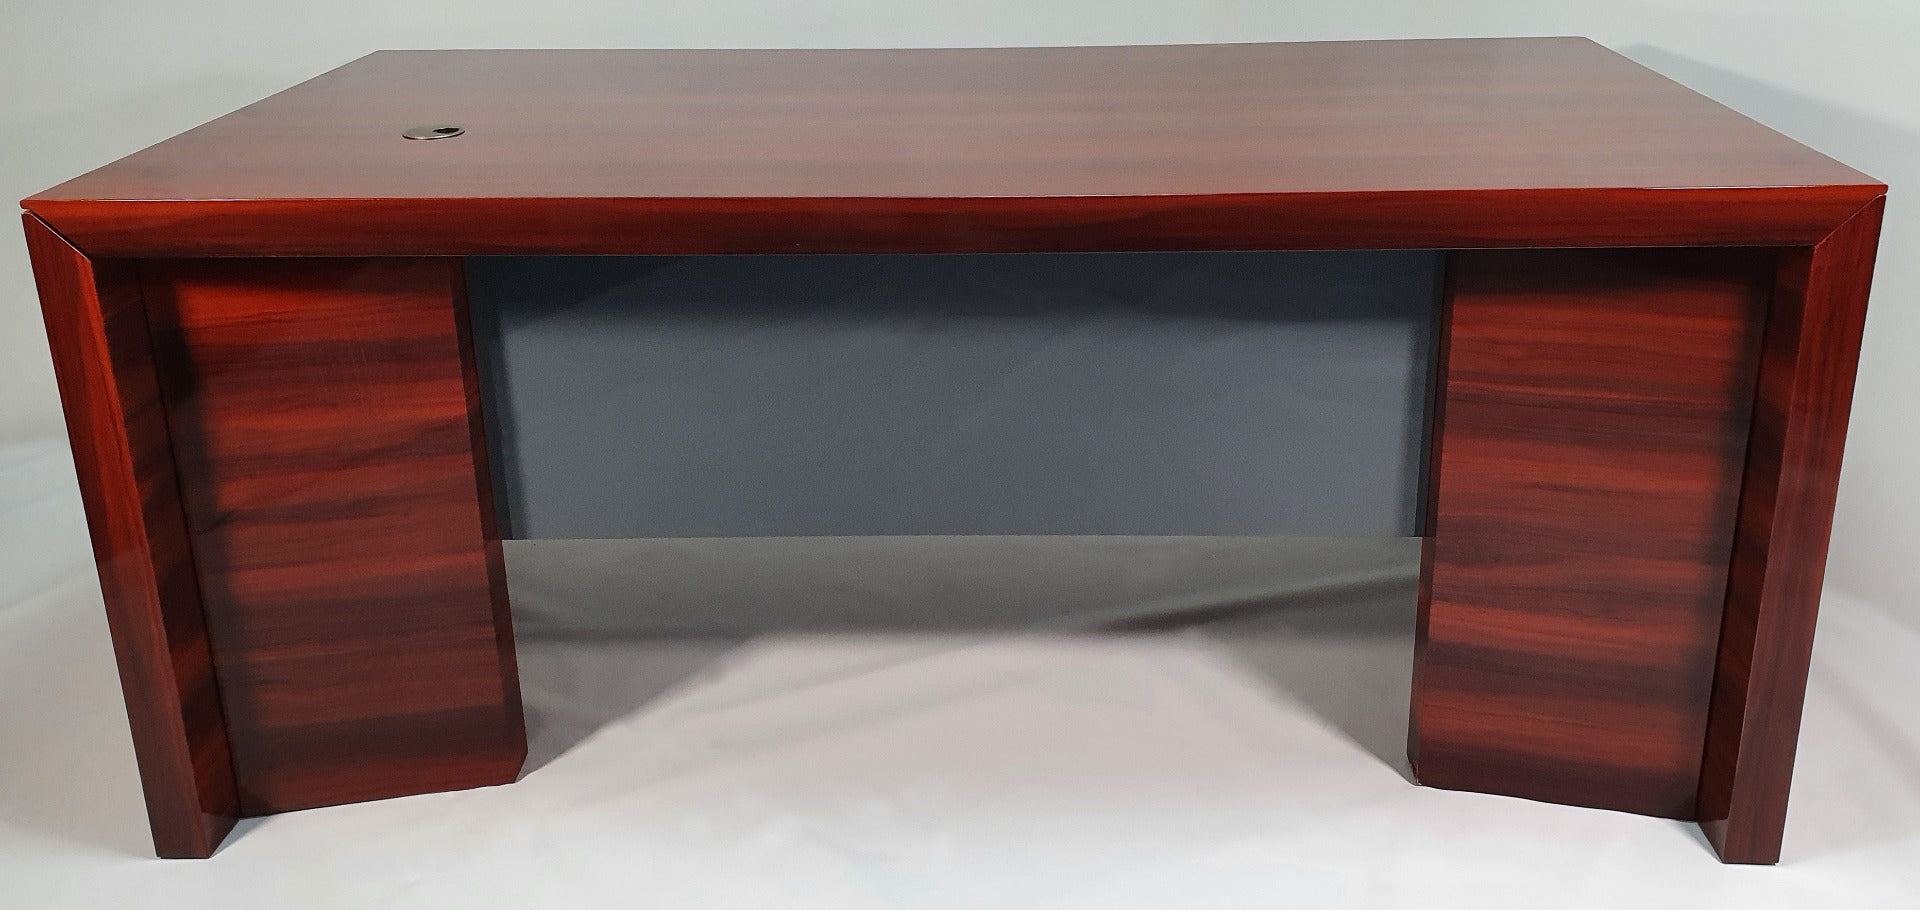 Luxury Office Desk In High Gloss Lacquered Mahogany Veneer With Grey Accents - DES-0950